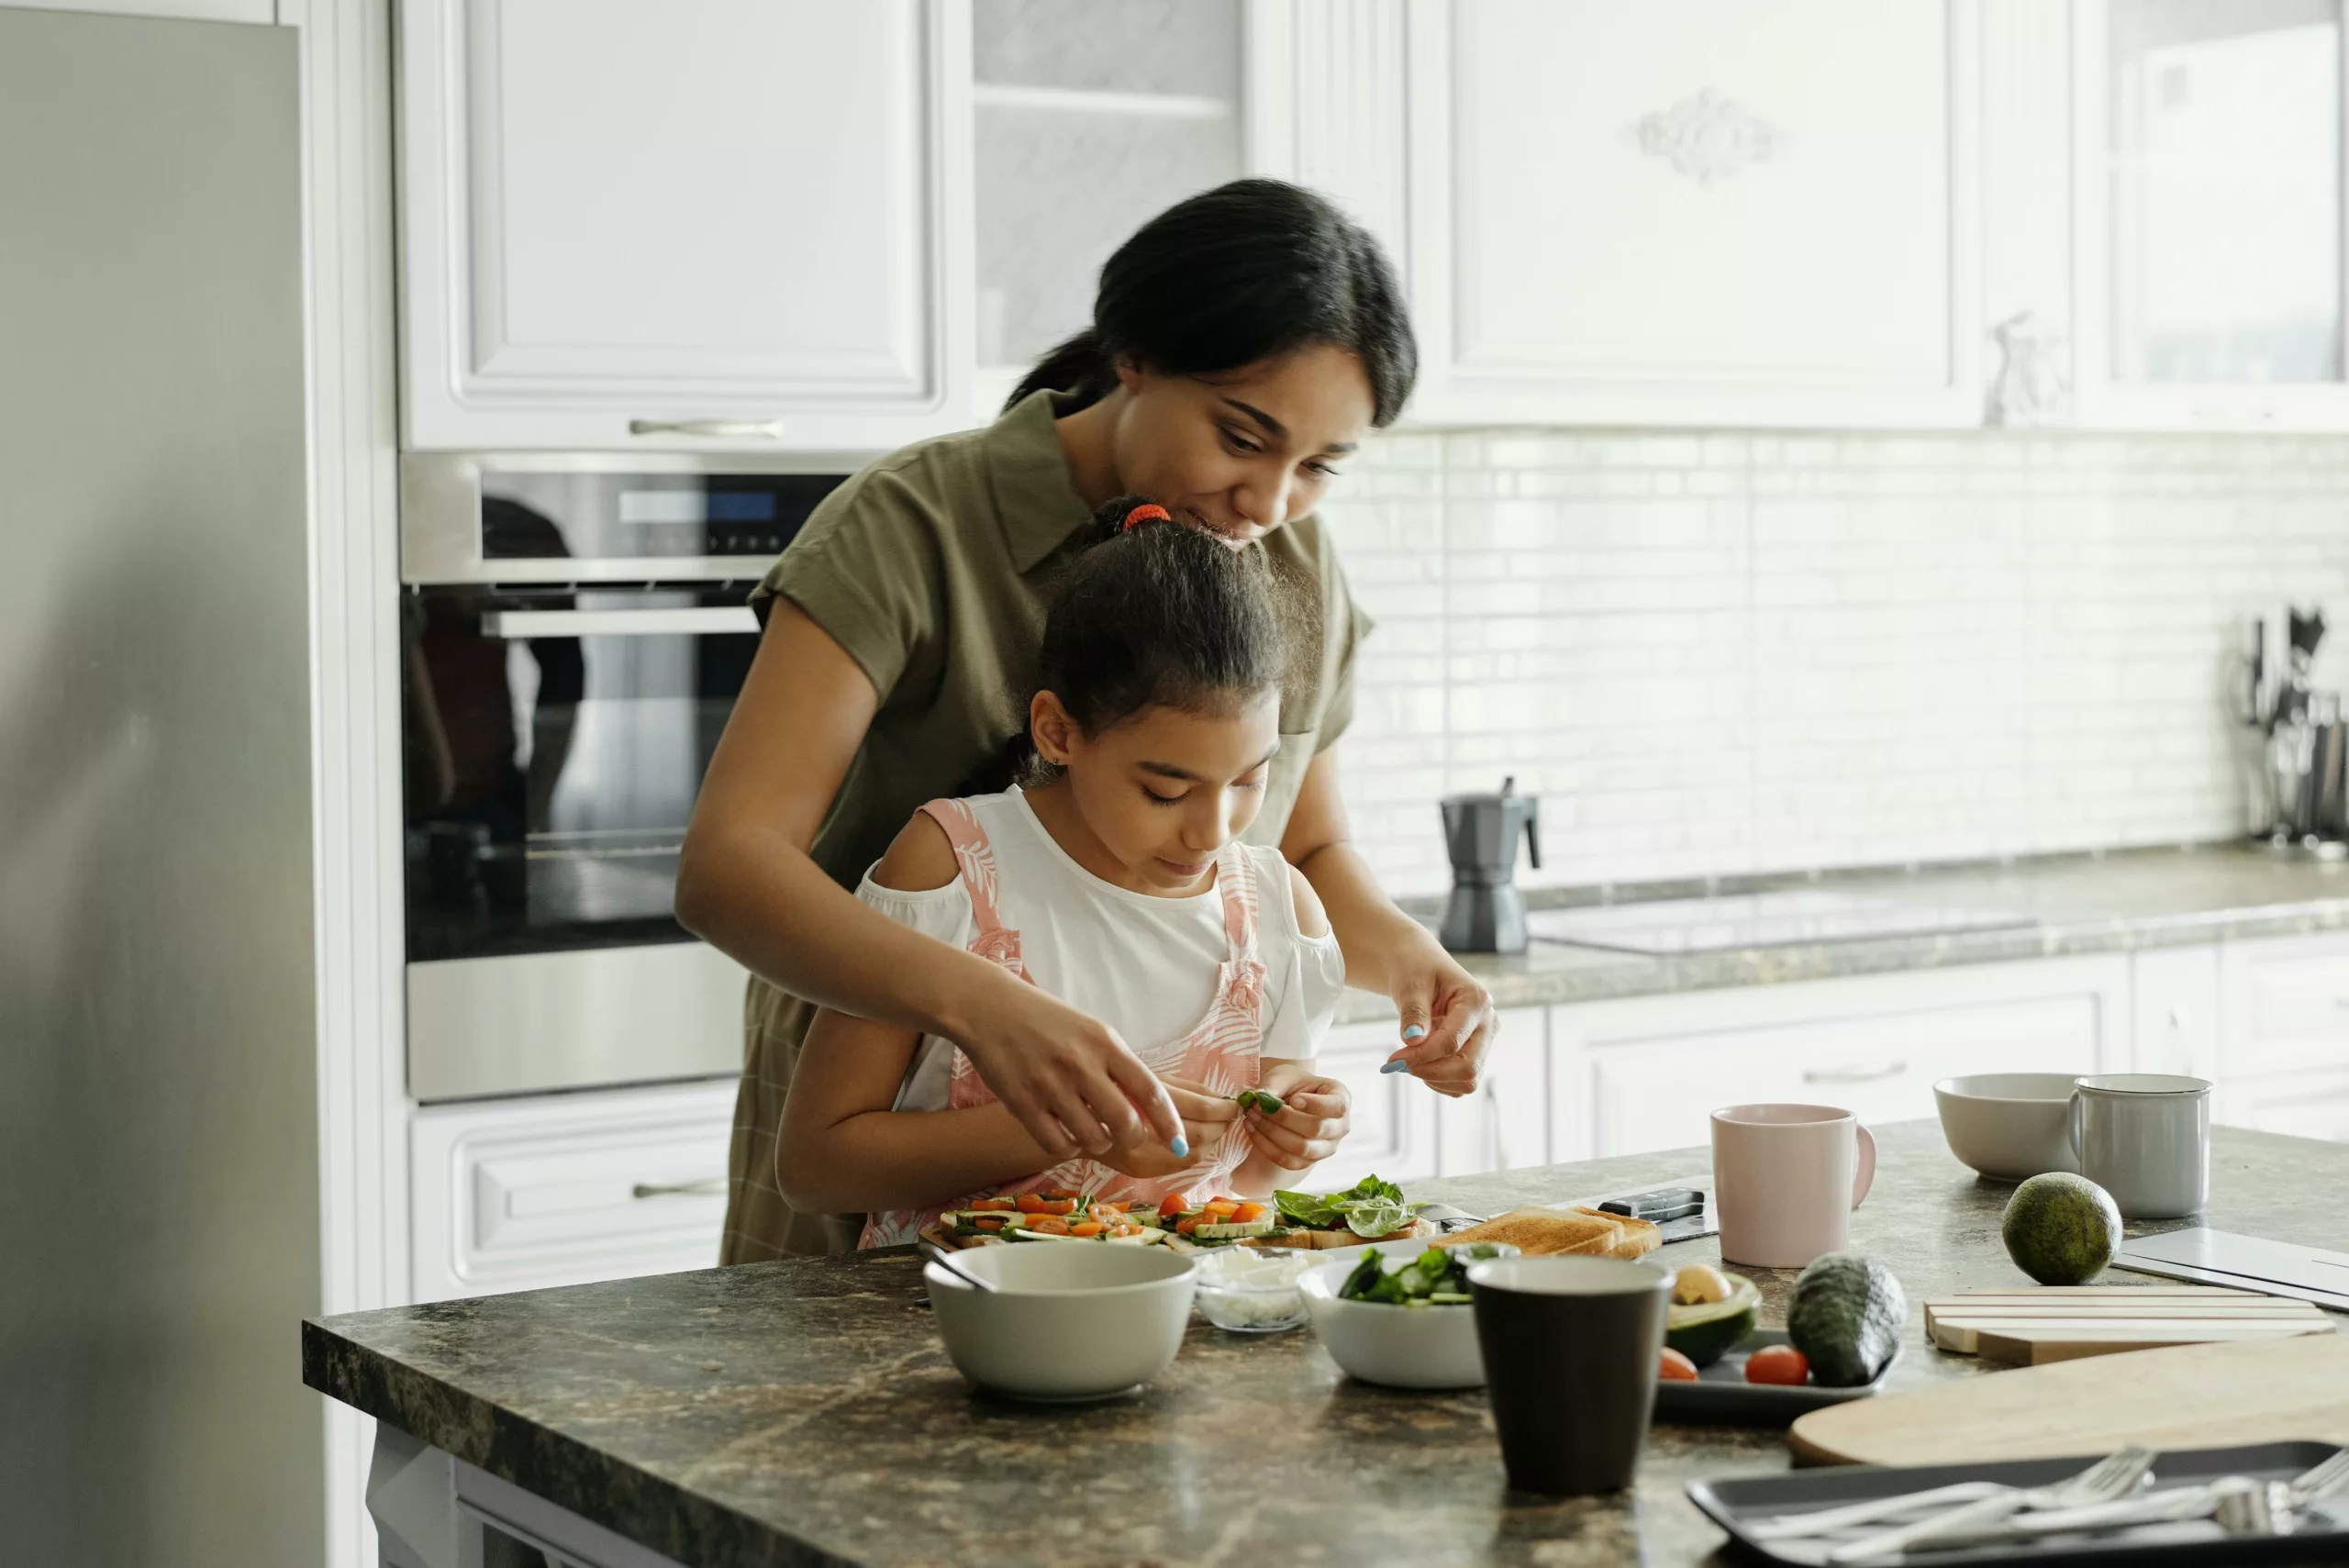 A mother and daughter of color preparing a healthy meal together in the kitchen, surrounded by fresh vegetables and cooking utensils.